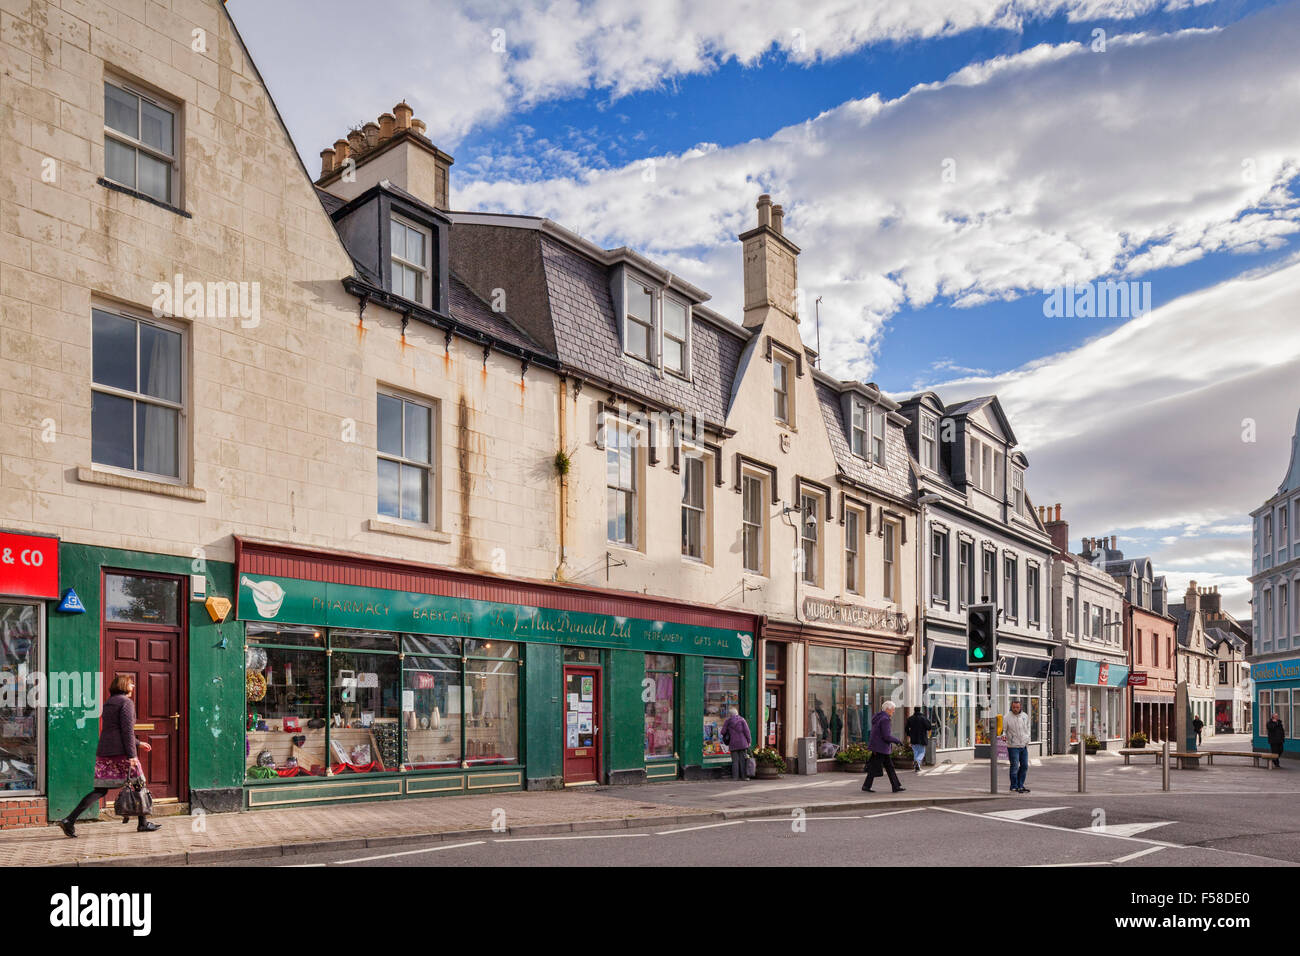 Shops and shoppers along Cromwell Street in Stornoway, Isle of Lewis, Outer Hebrides, Scotland, UK. Stock Photo